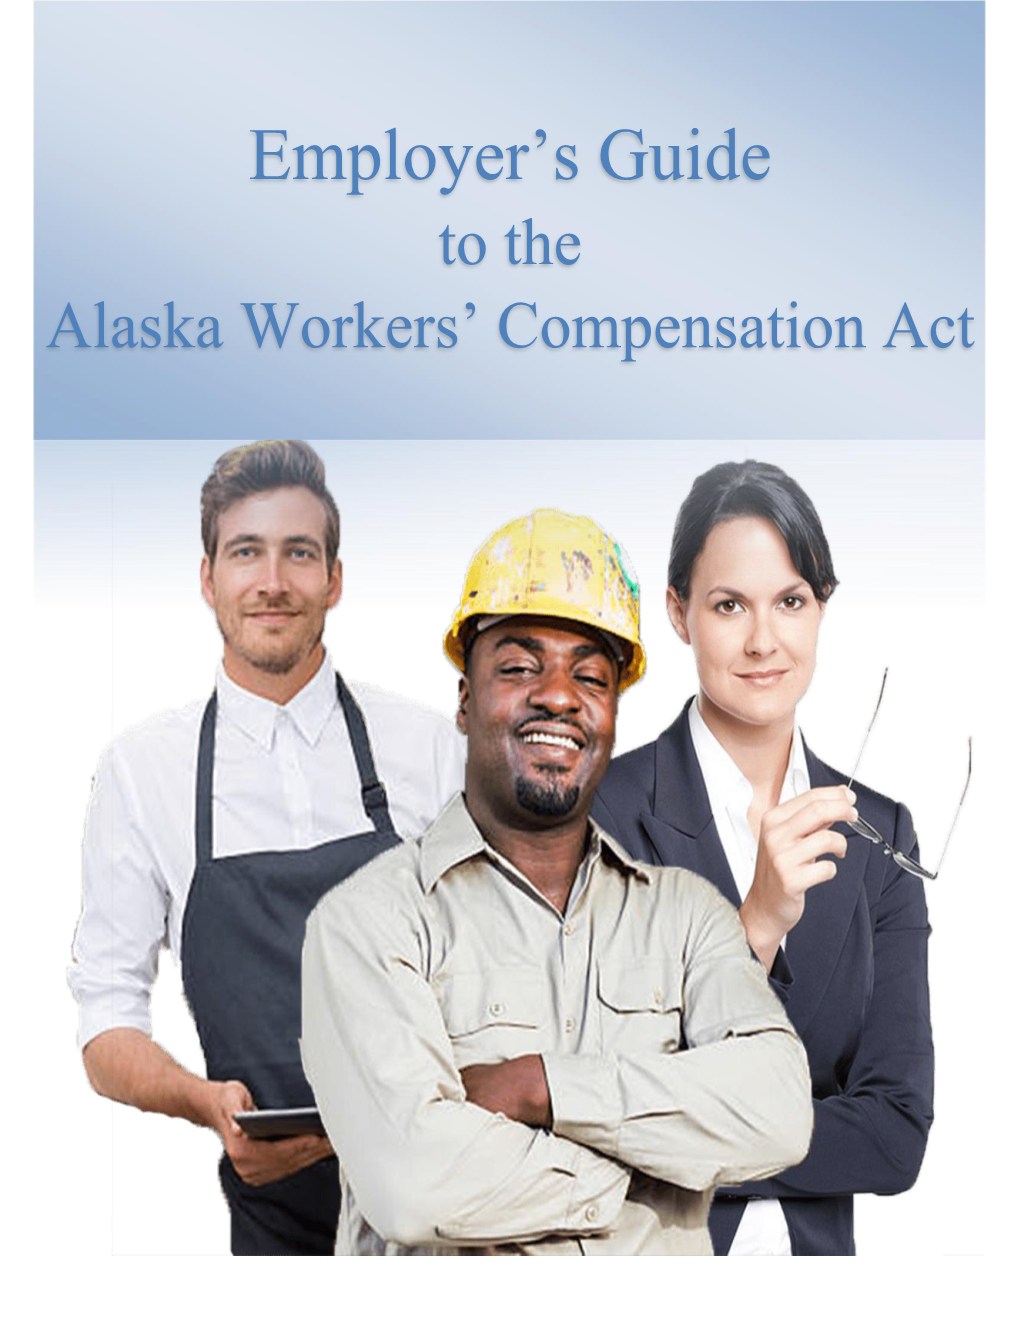 Employer's Guide to the Workers' Compensation